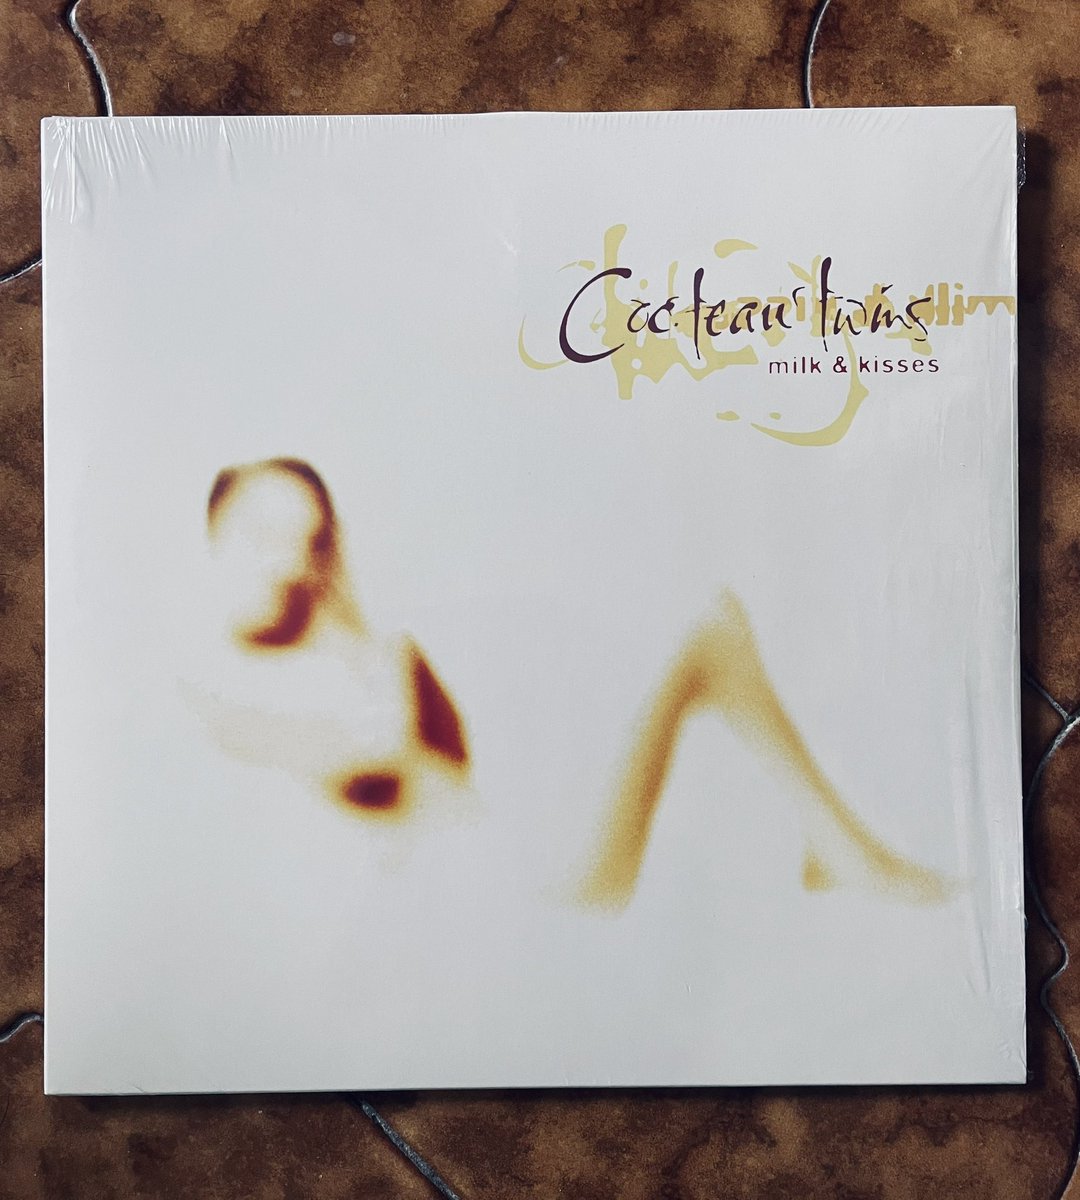 There is something about the mighty #CocteauTwins I have been a fan for donkeys years they were light years ahead just simply love them! Here’s the “Milk&Kisses” album I bought recently a 2024 re-issue of the original 1995 album! @mrsimonraymonde #ElizabethFraser @robinguthrie